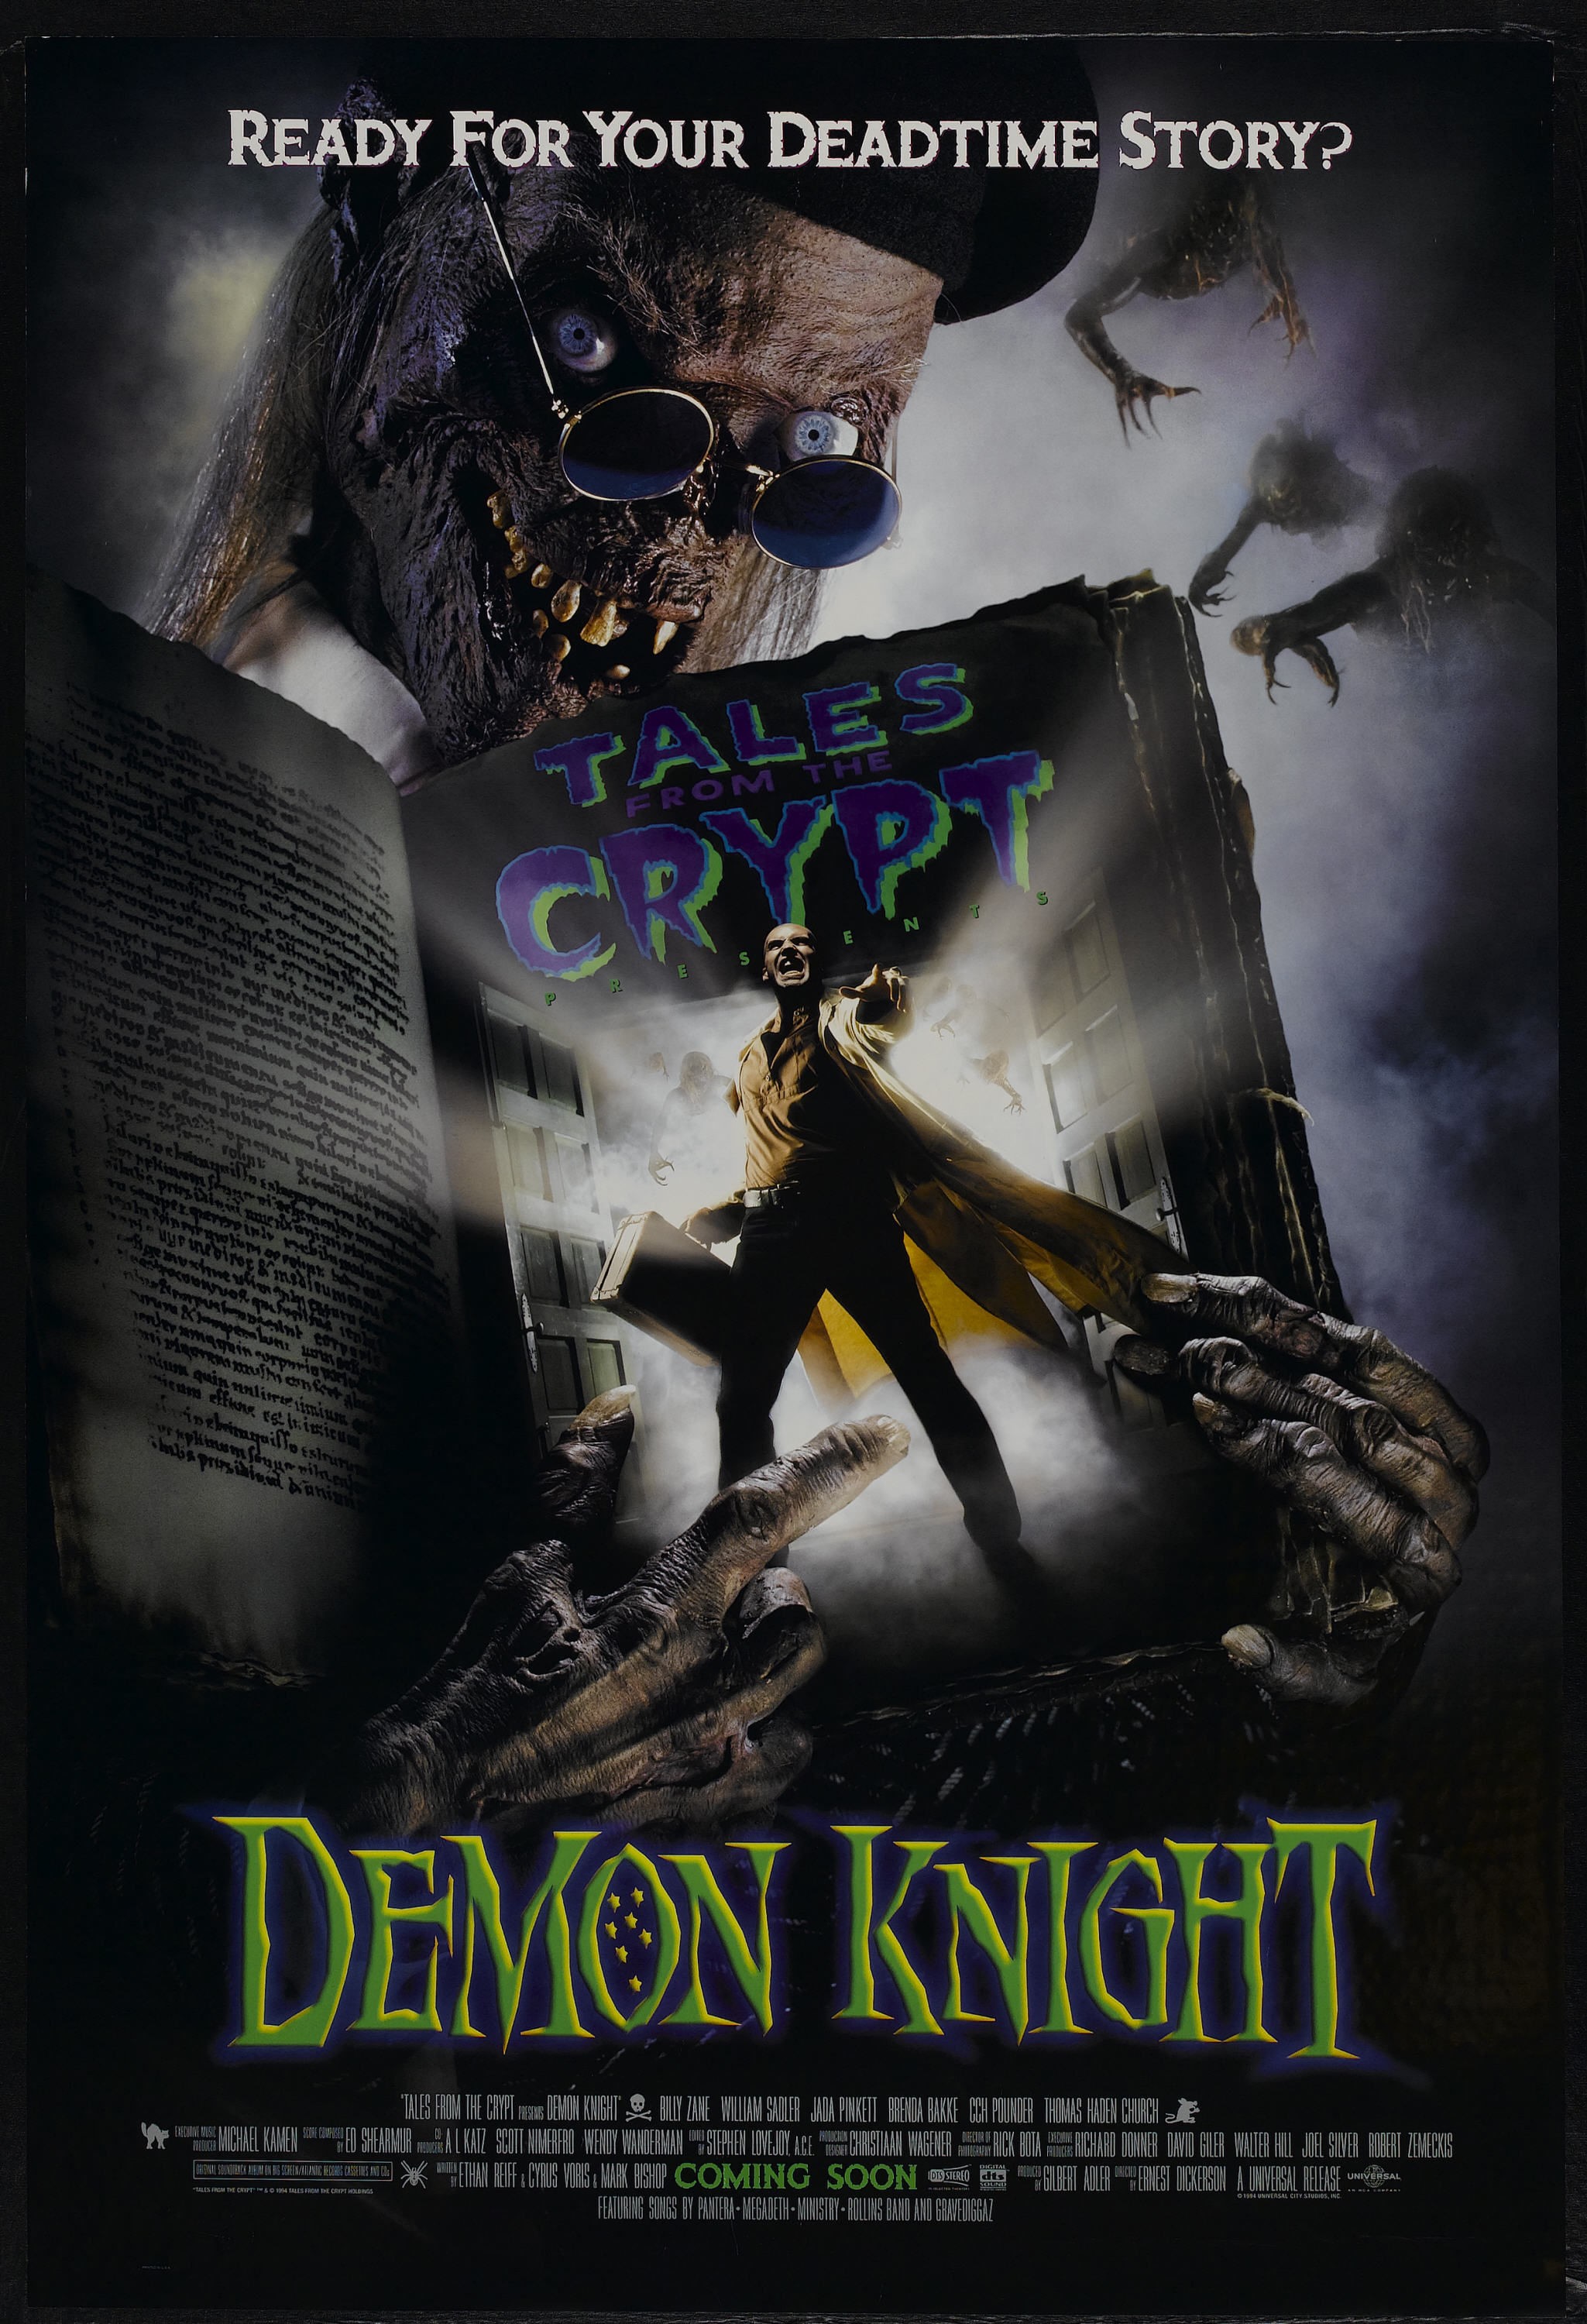 TALES FROM THE CRYPT - DEMON KNIGHT